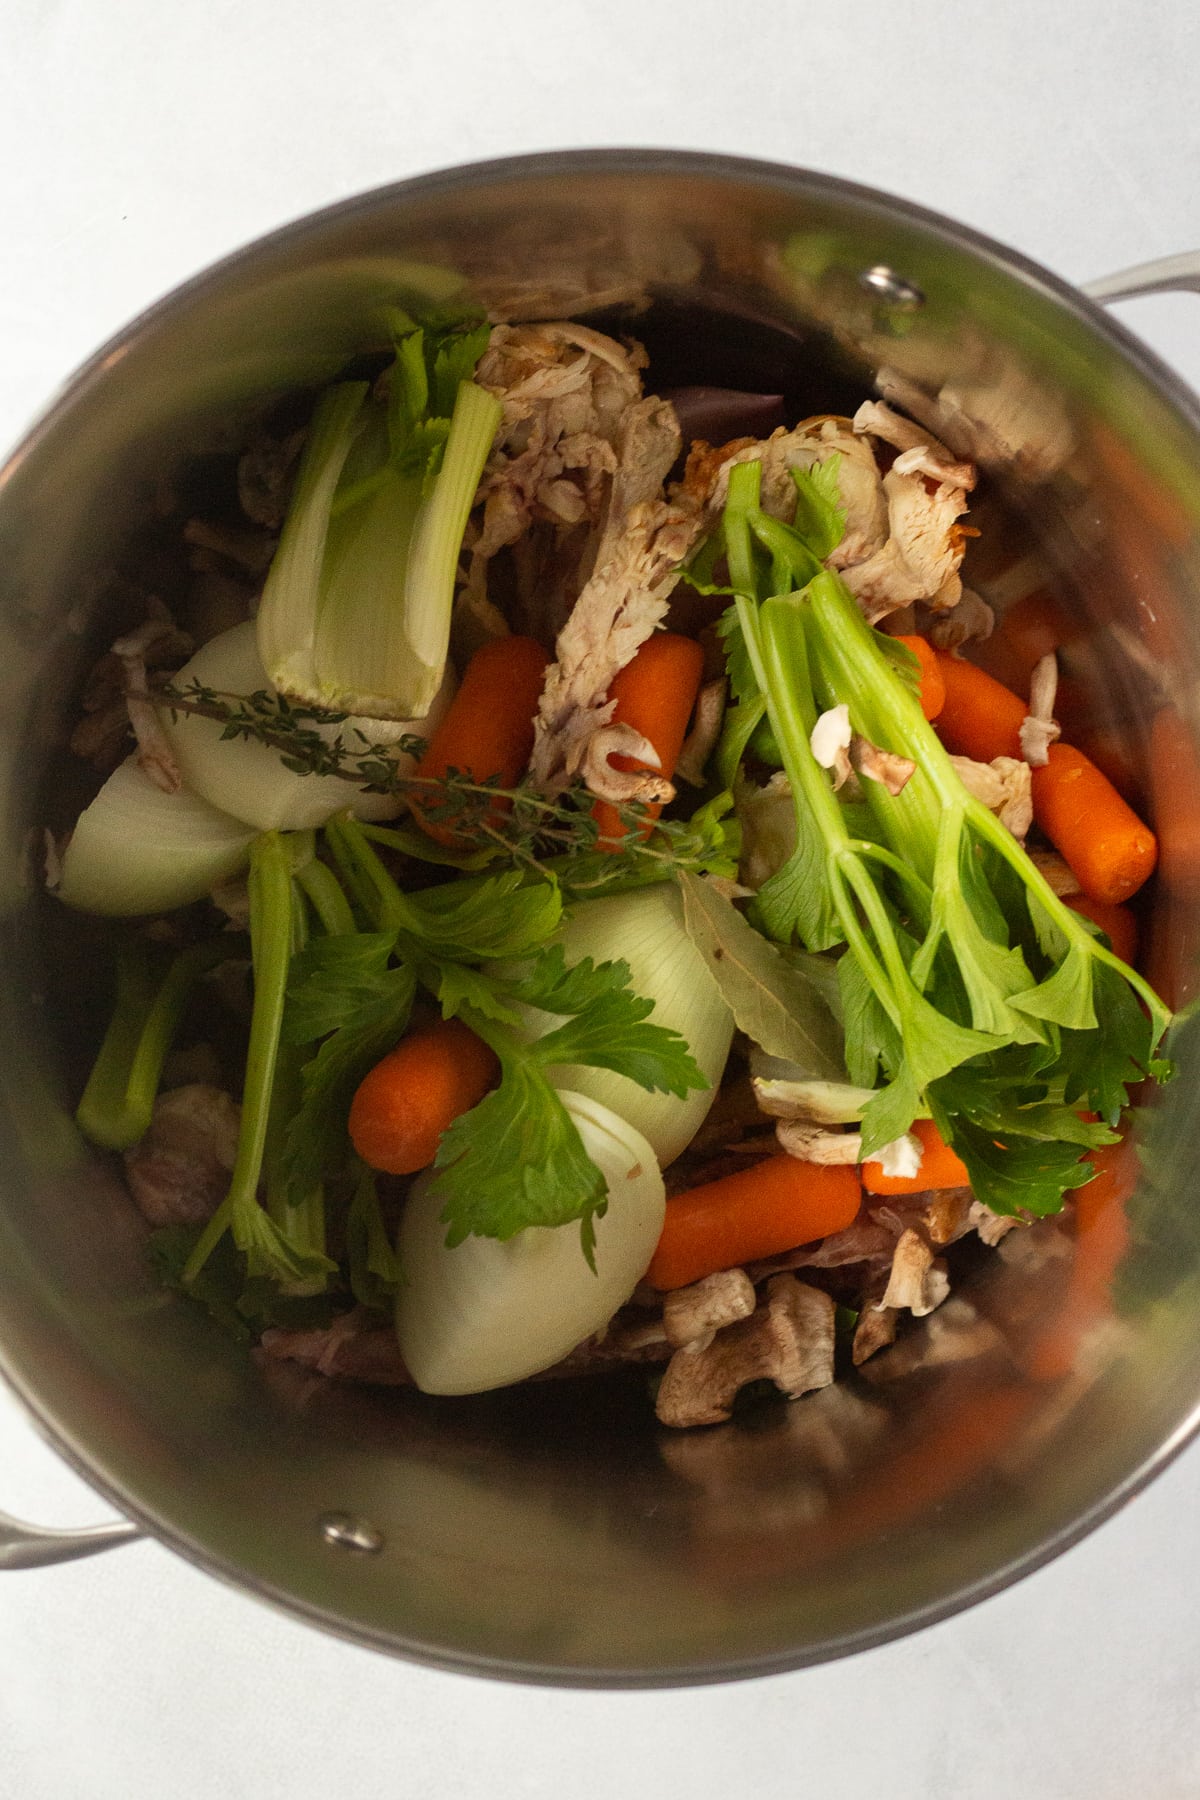 A top down shot of a chicken carcass and cut up veggies in a large stock pot.